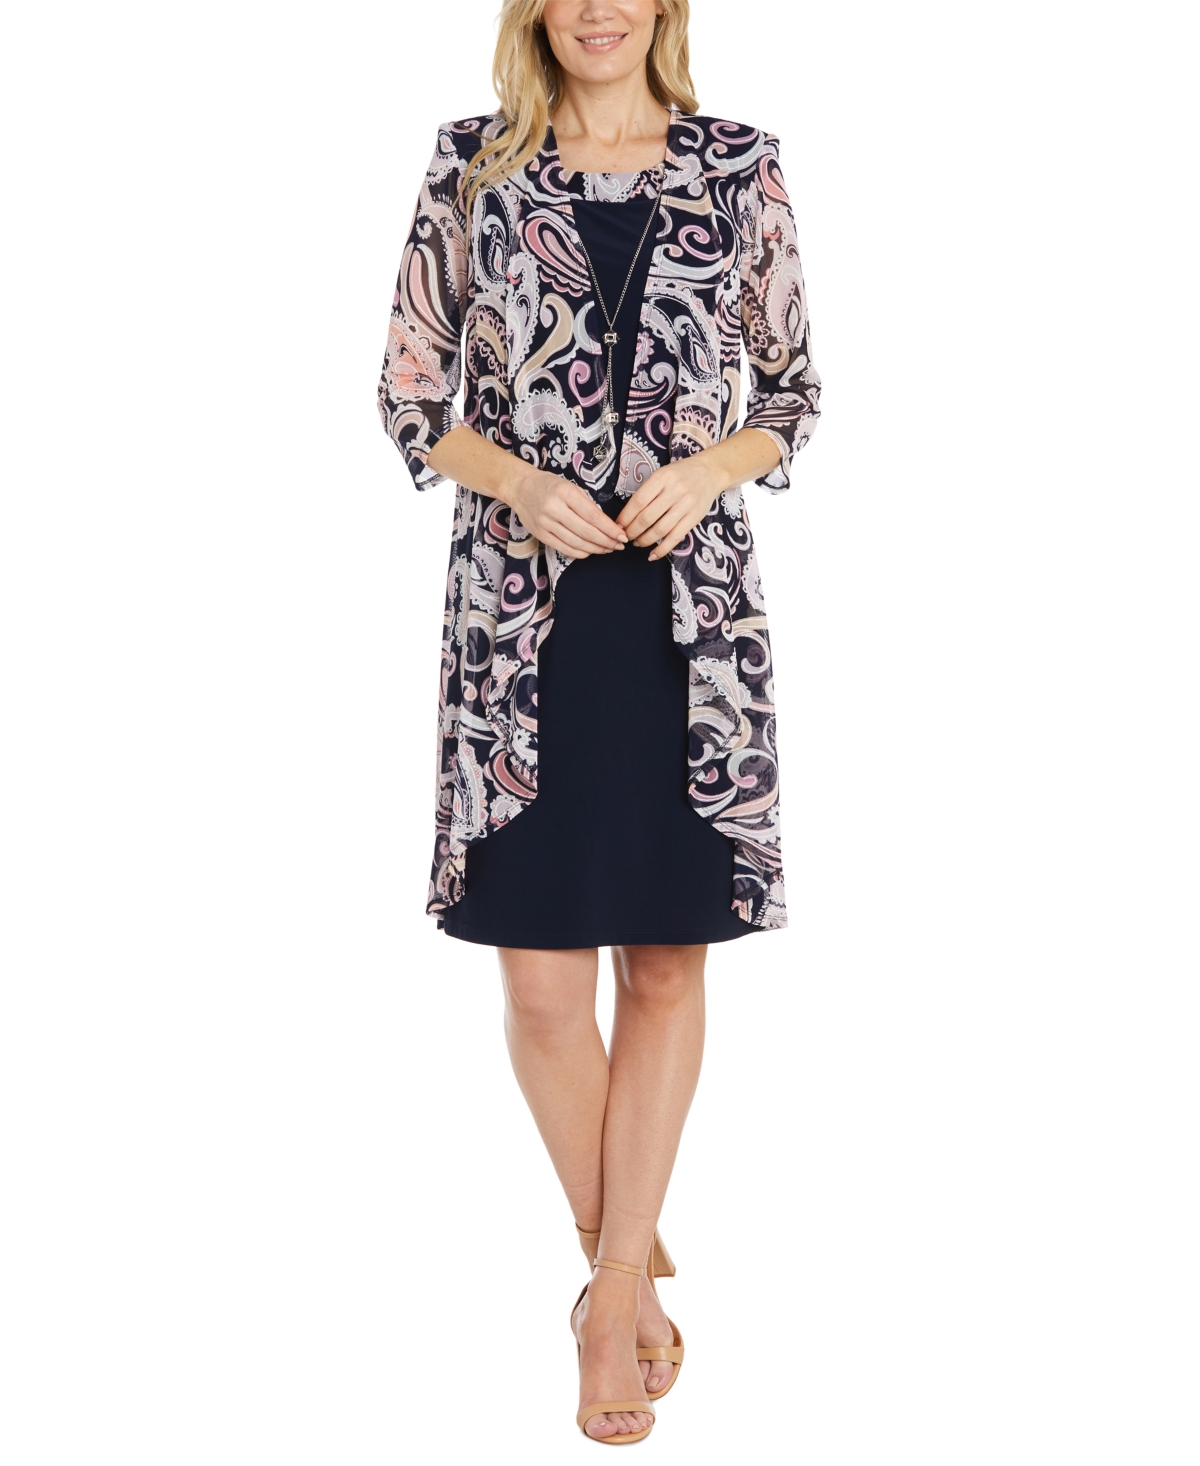 R & M Richards Women's 2-pc. Printed Jacket & Necklace Dress Set In Navy Pink